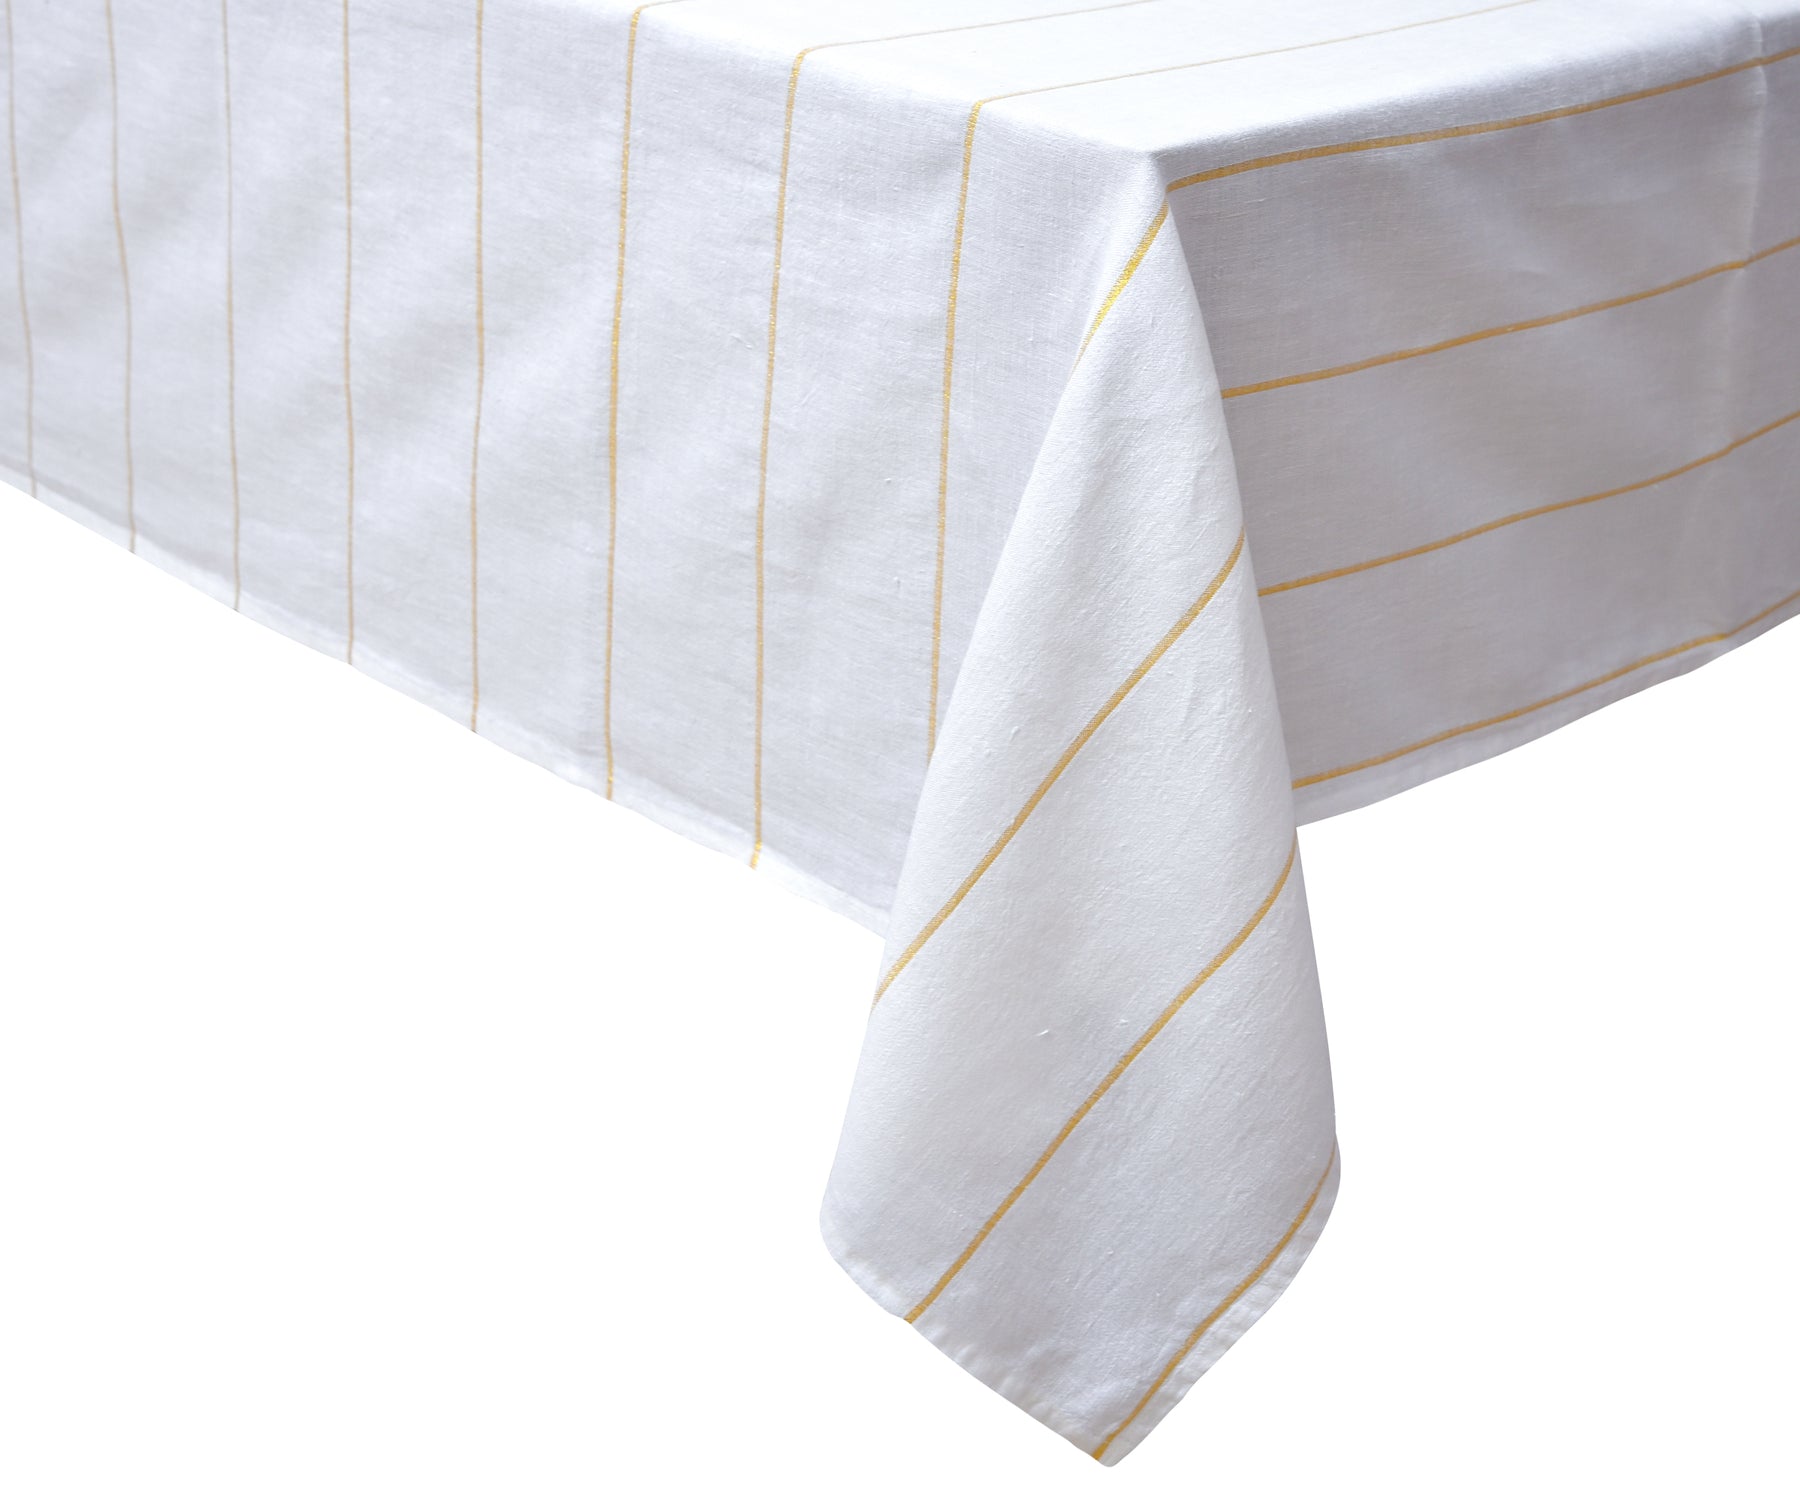 You can find rectangle tablecloths in various sizes, such as 60 x 102 inches, to accommodate different table dimensions. 